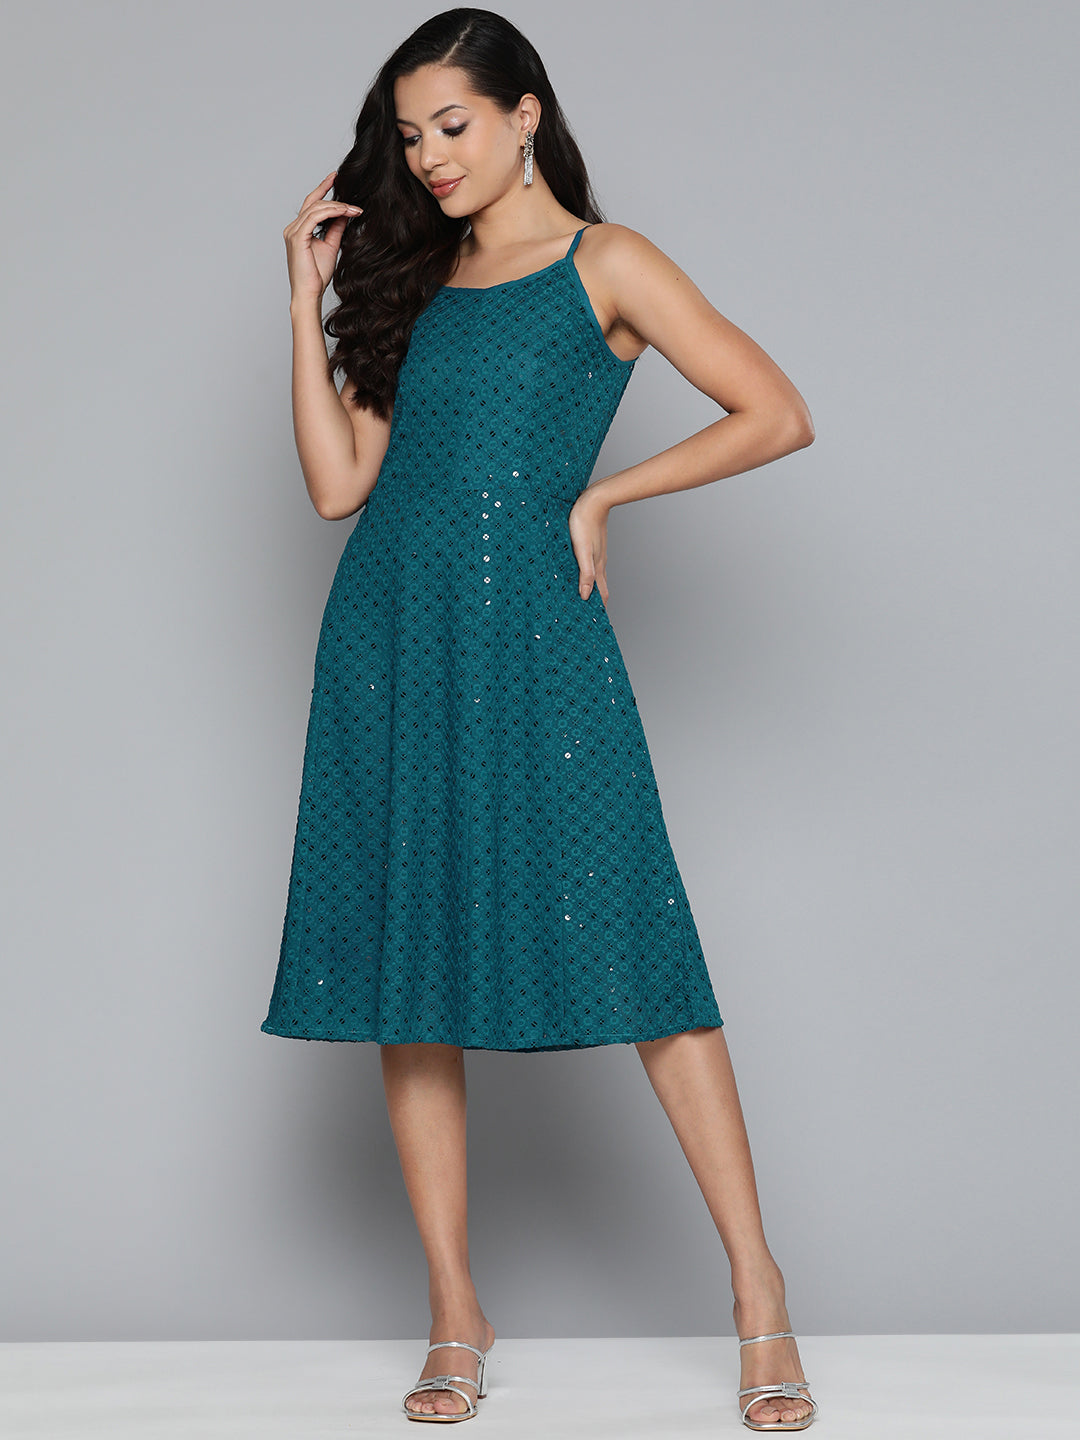 Jompers Blue Floral Sequin Embroidered A-Line Midi Dress ( JOK 1494 Peacock )